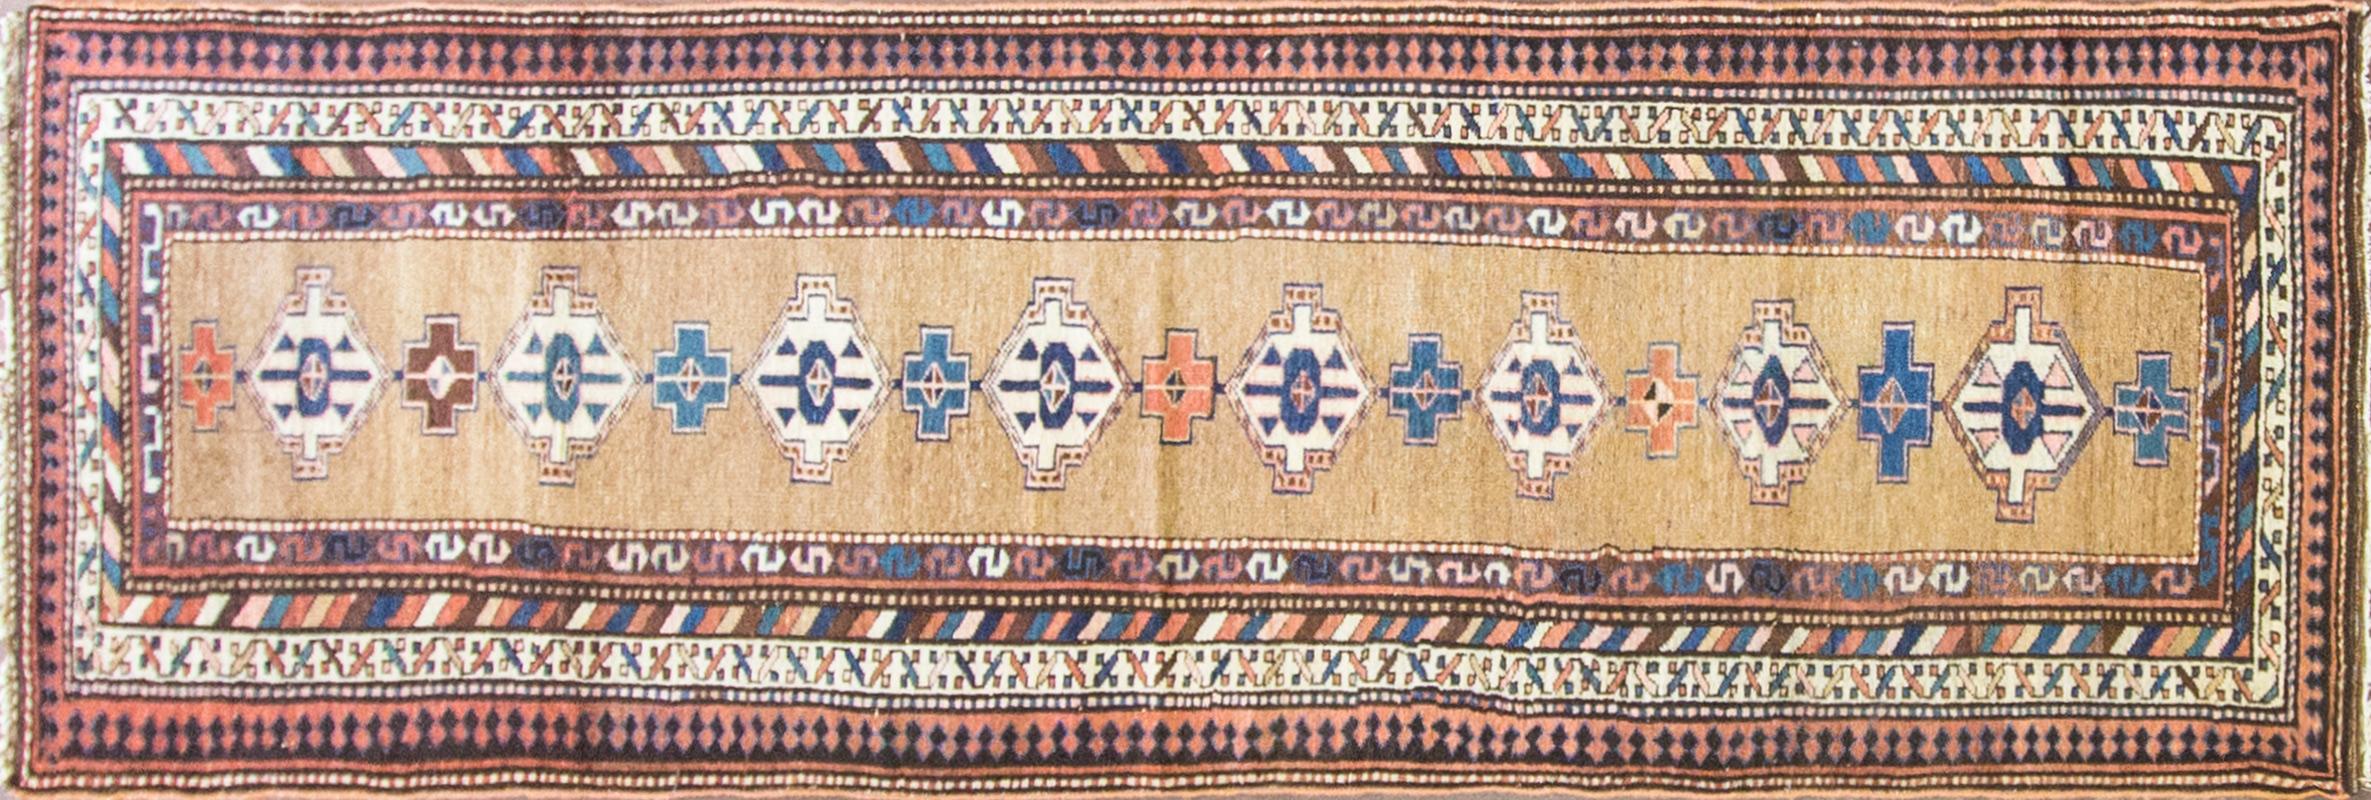 In the province of Azerbaijan in northwestern Iran, the village of Sarab served as the name source for antique Sarab rugs and it is located in northwest Iran in the province of Azerbaijan and they known for their fine long rugs or runners with a